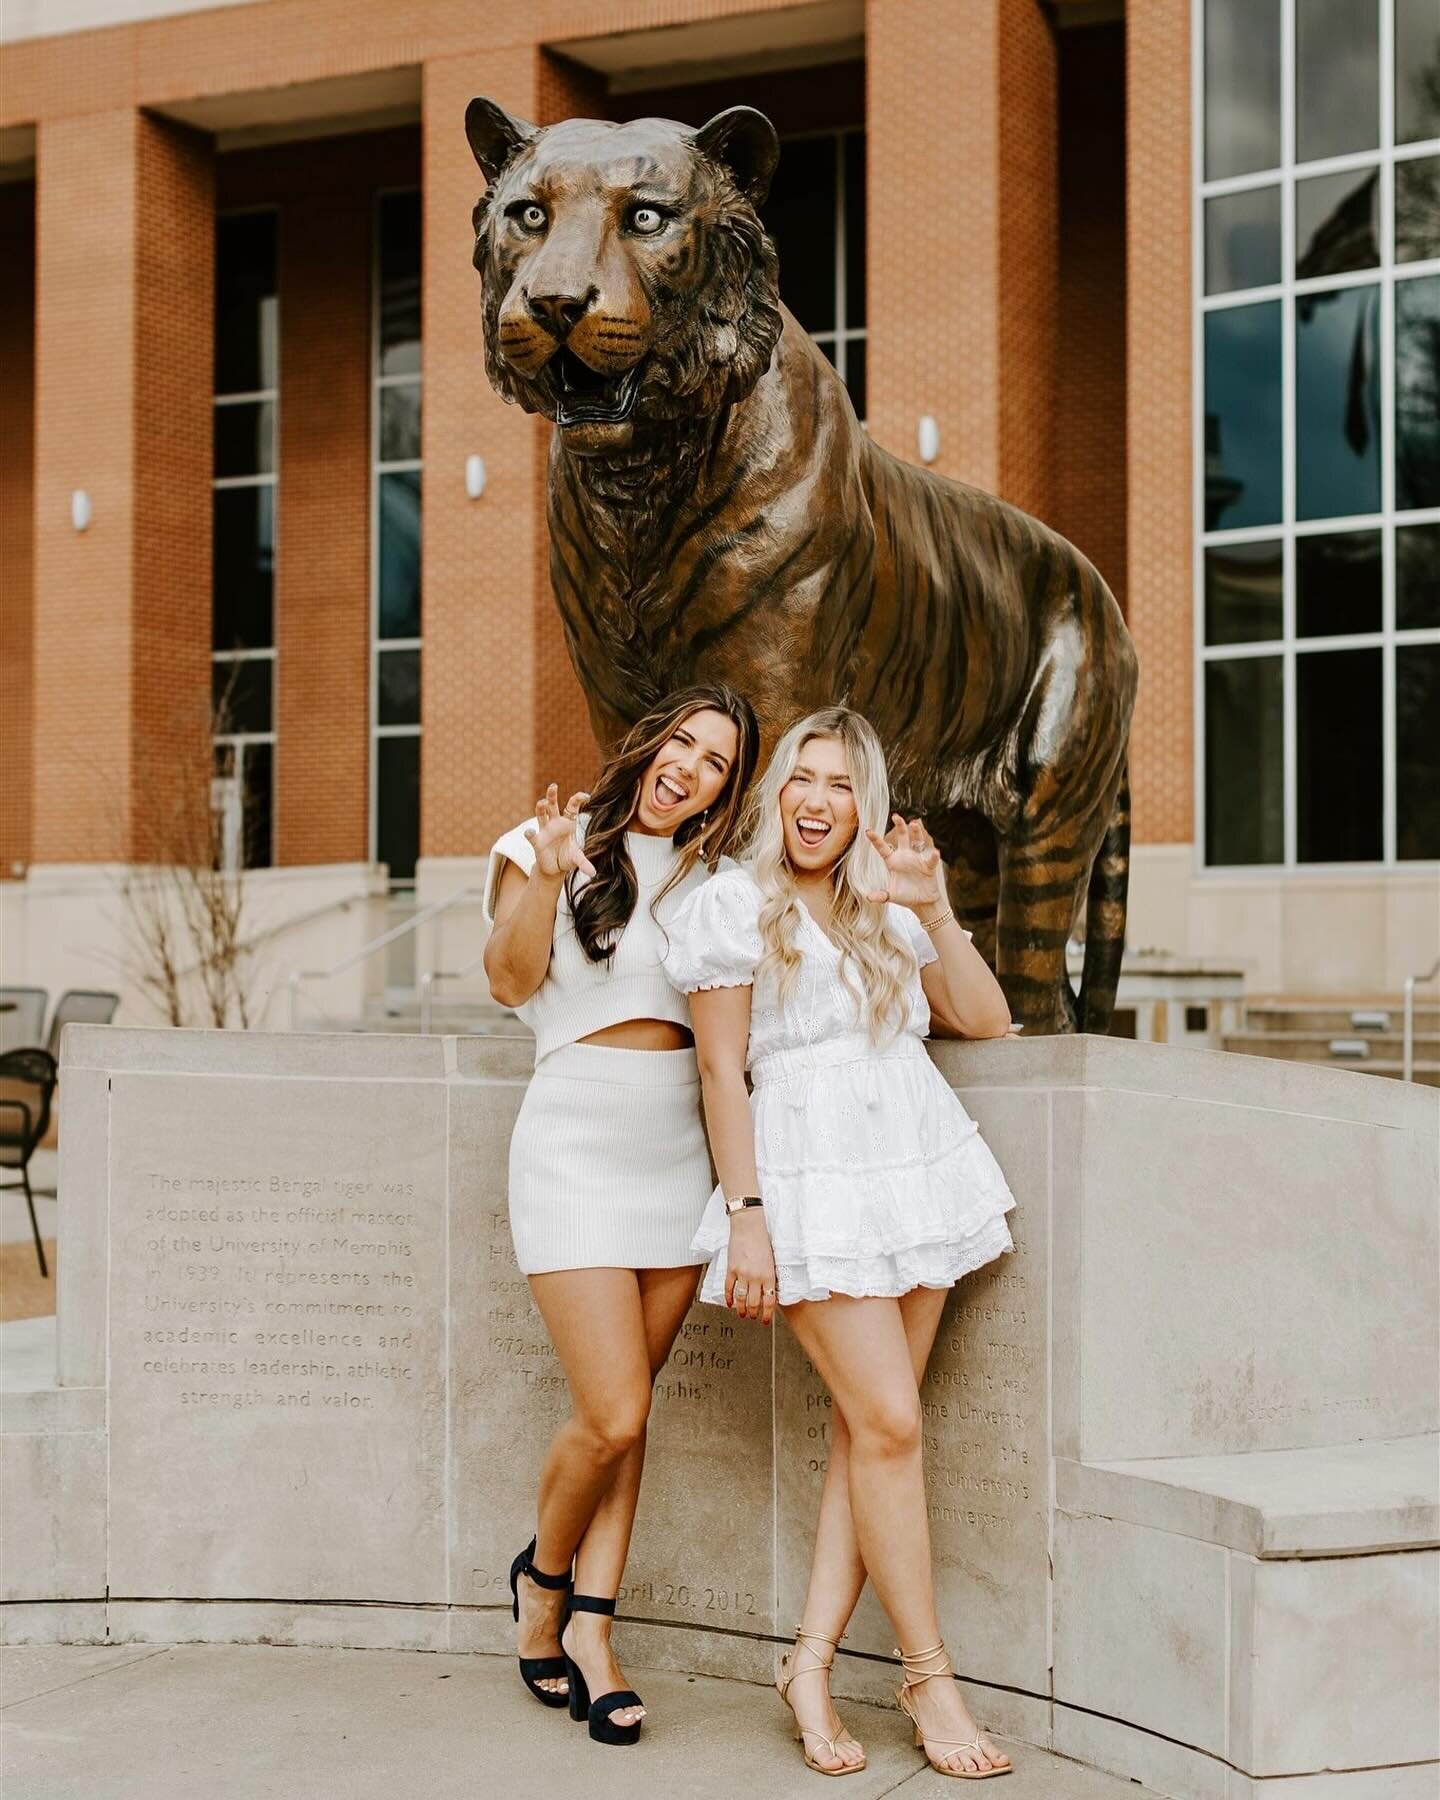 🐾 Fierce friendship energy 🐾 Loved getting to meet and work with Adyn and Mary! Their friendship was so sweet. Let&rsquo;s send all three good vibes on their journey out of college 🖤

I am still in disbelief that I started college 11 years ago and